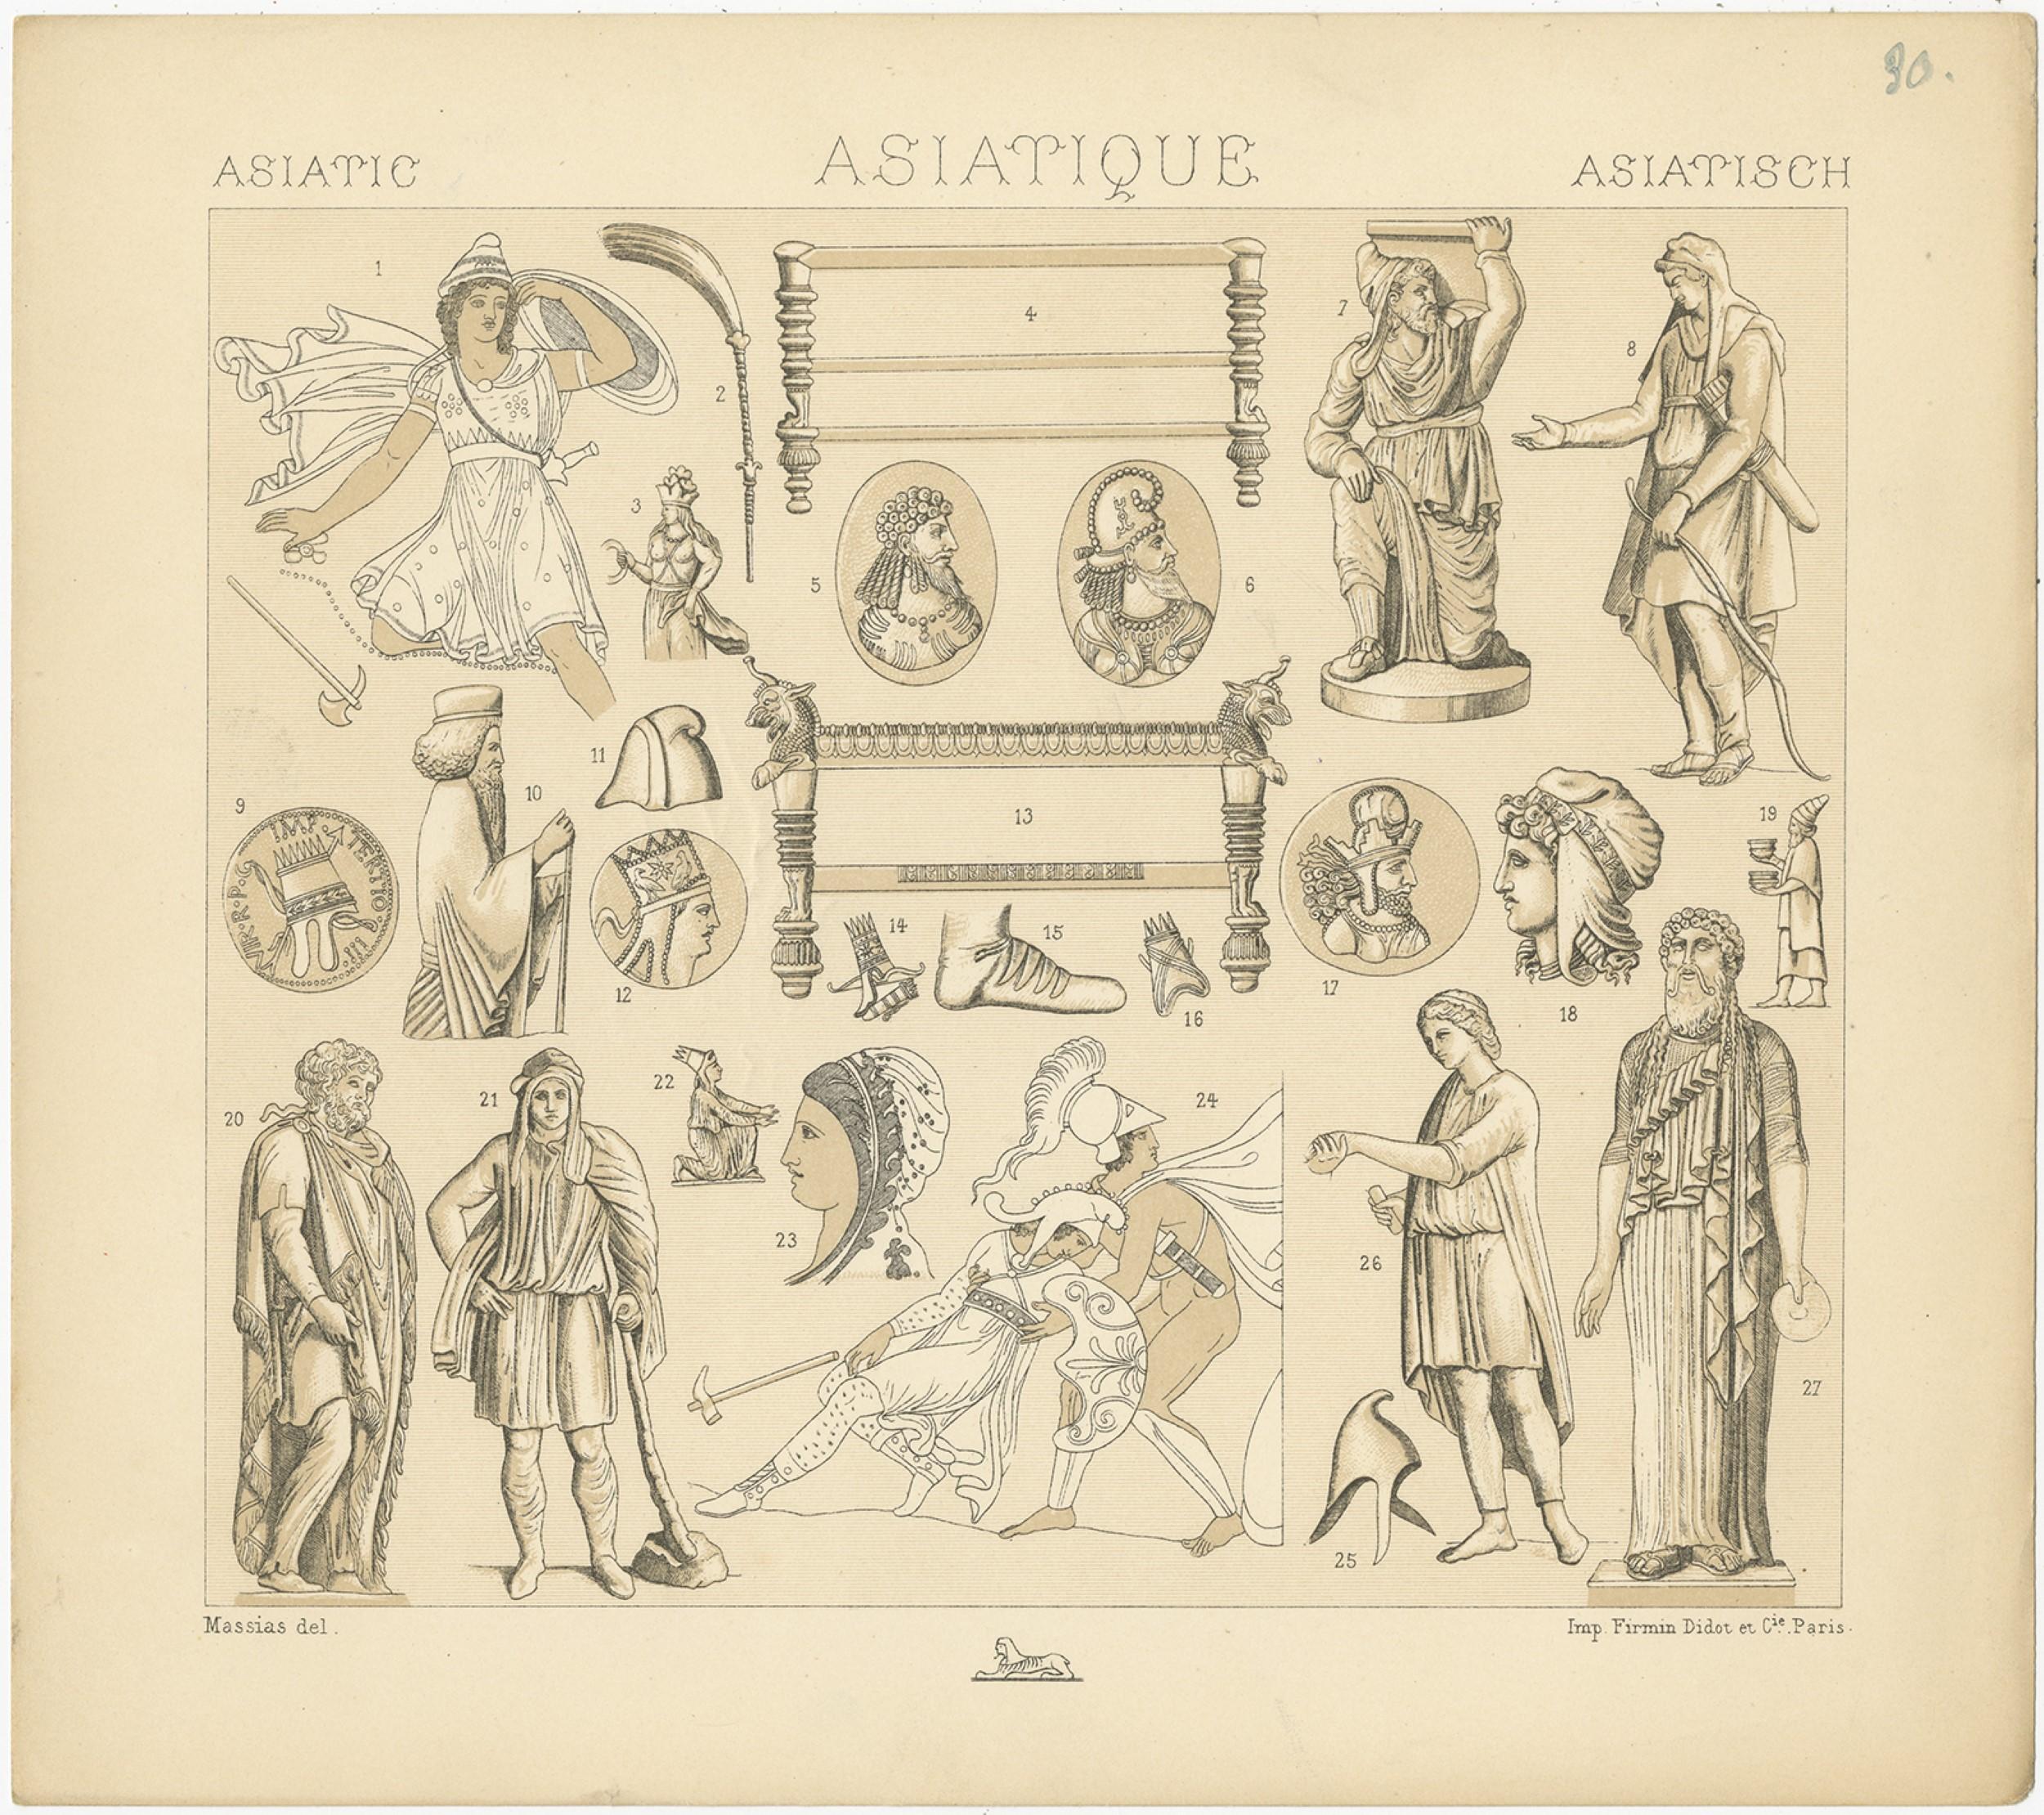 Antique print titled 'Asiatic - Asiatique - Asiatisch'. Chromolithograph of Asiatic Decorative Objects. This print originates from 'Le Costume Historique' by M.A. Racinet. Published, circa 1880.